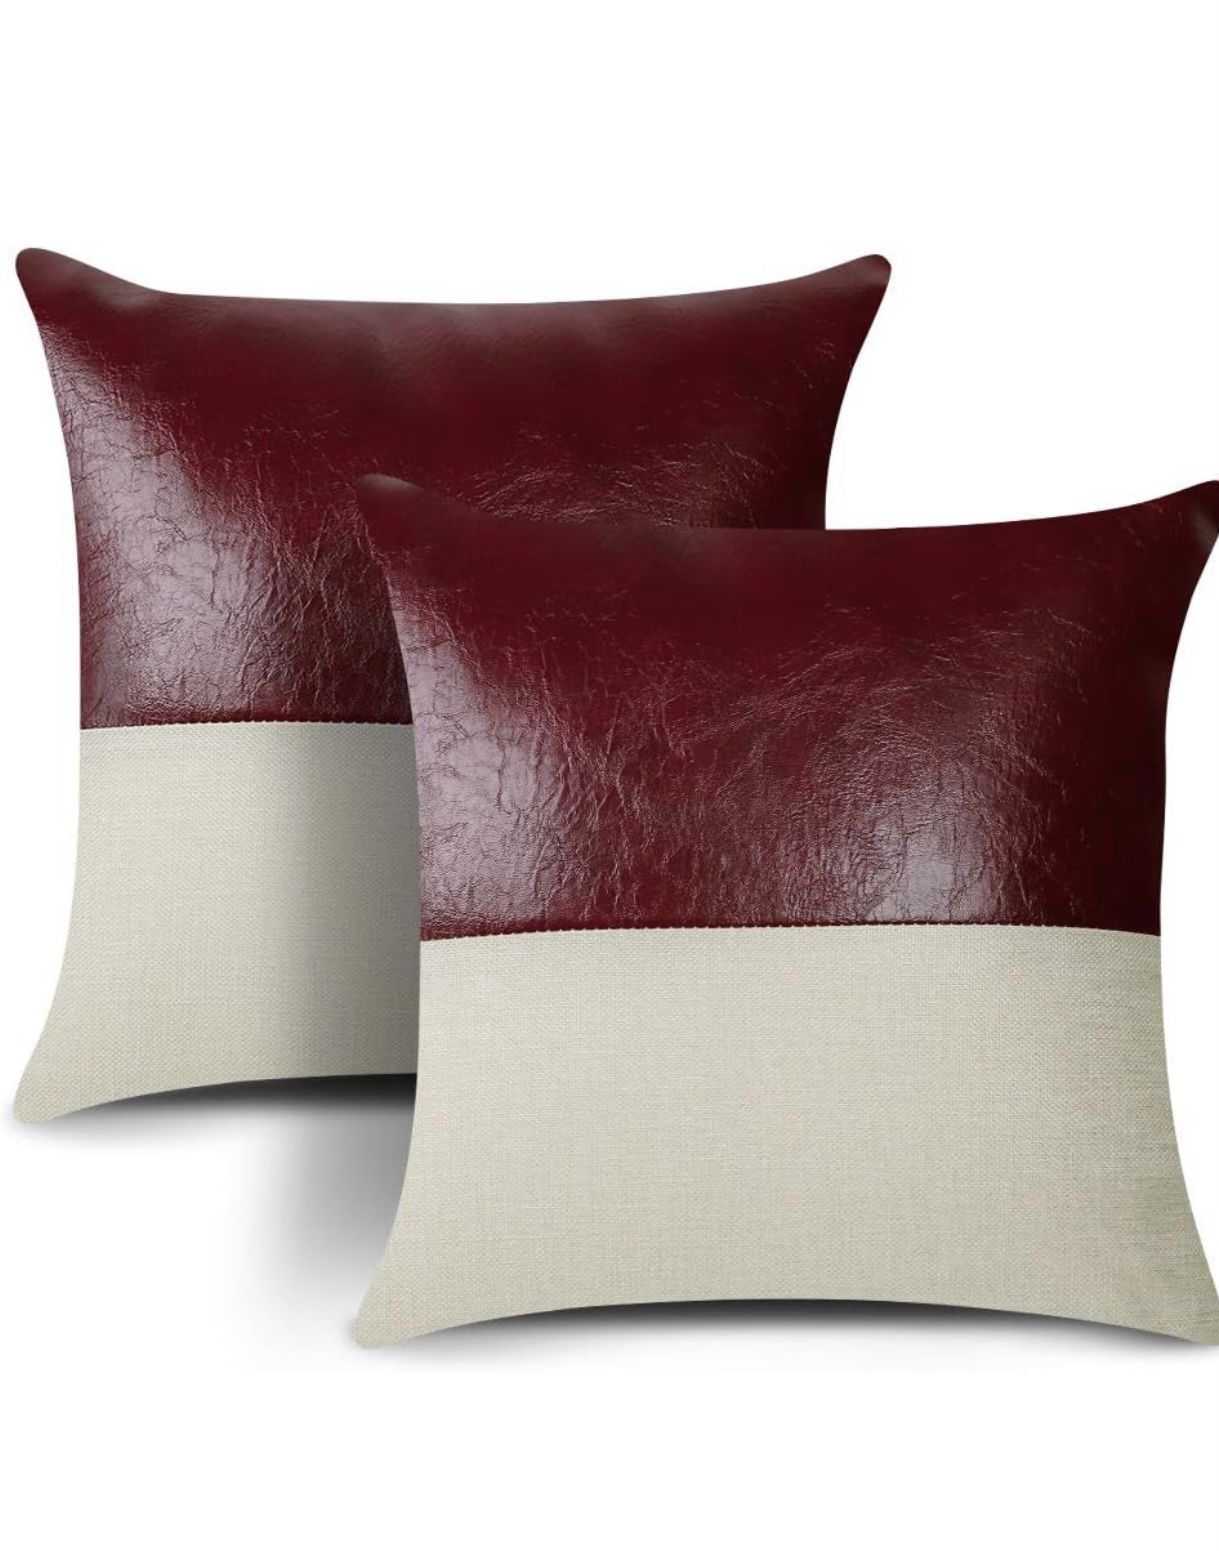 2 Pillow Cases 18x18 Leather Burgundy One Side Other Beige Cloth 